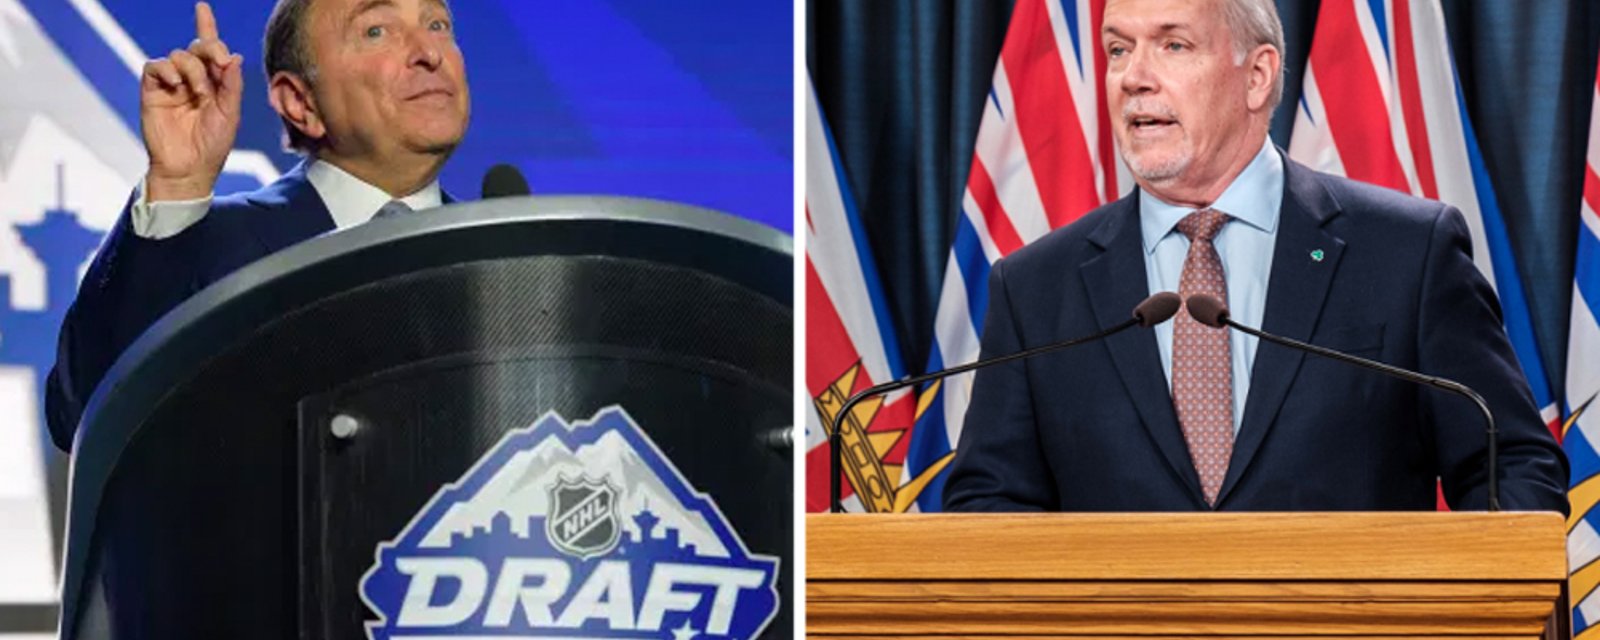 BC premier in negotiations with Gary Bettman to host NHL games in Vancouver